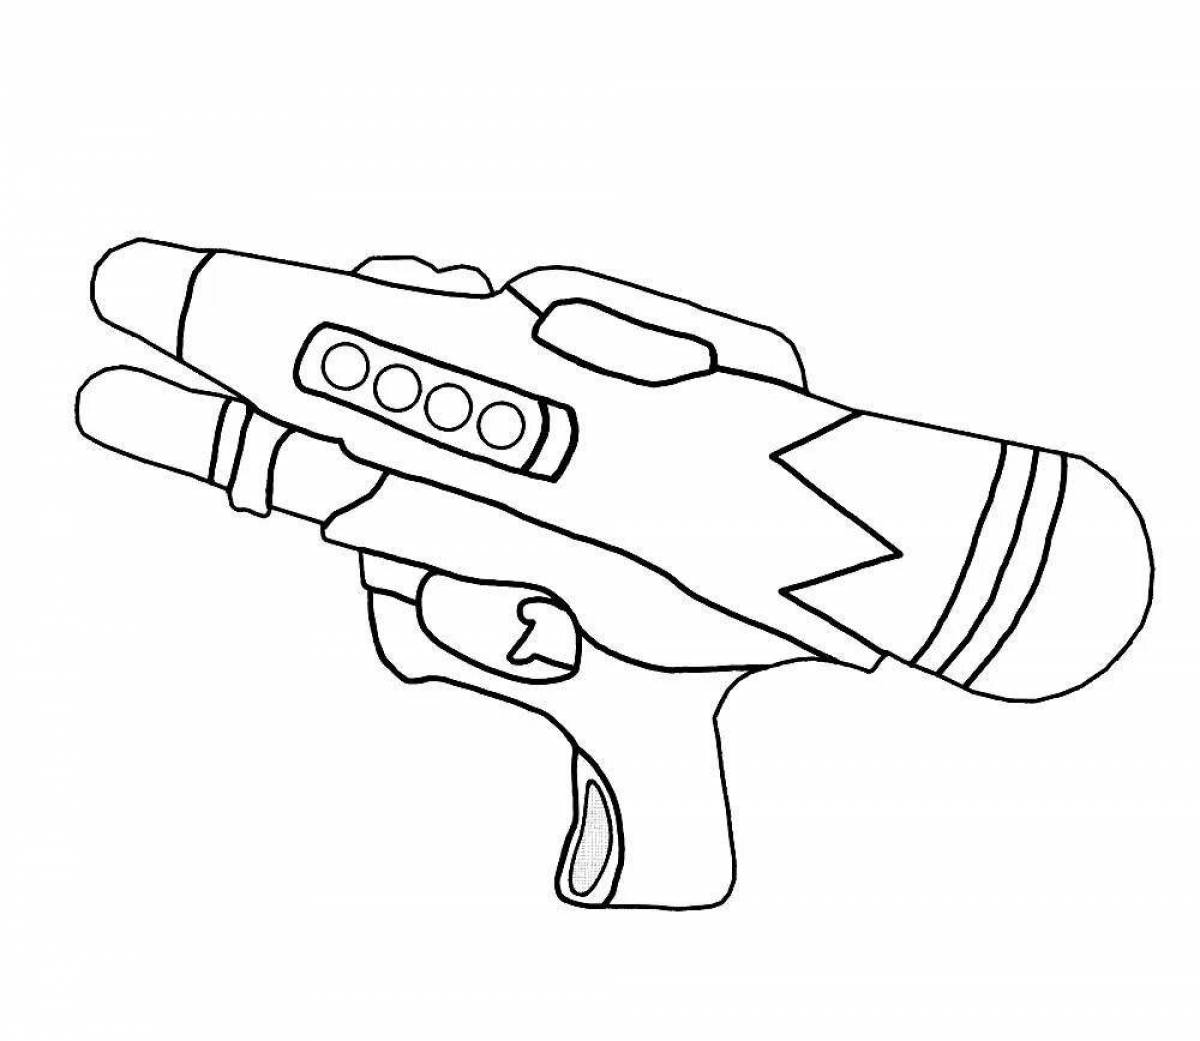 Great coloring pages with guns for boys